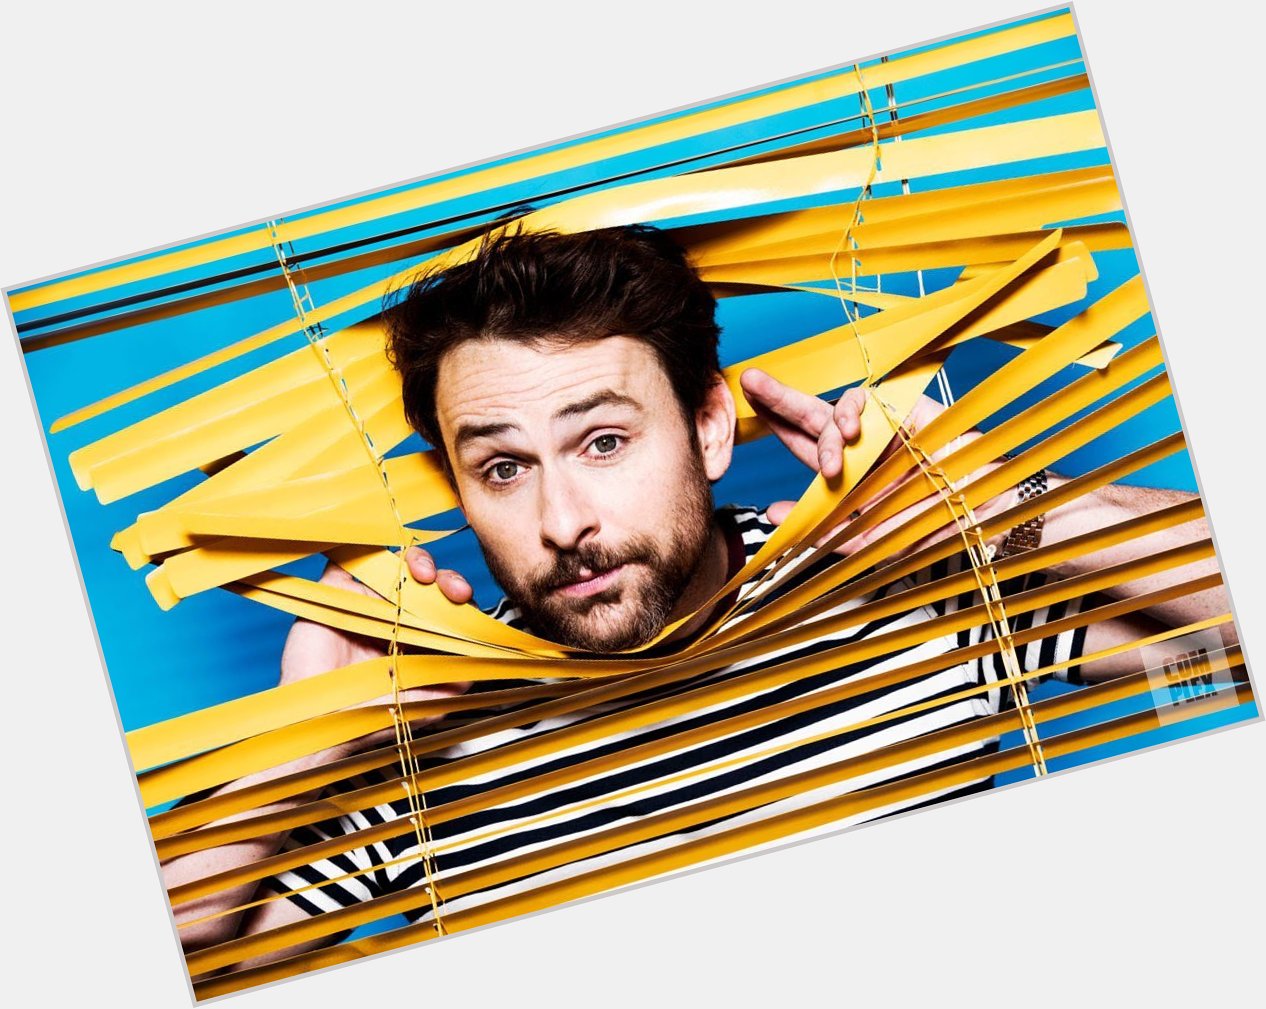 Happy birthday to sir charlie day you beautiful talented bastard thank you for existing 